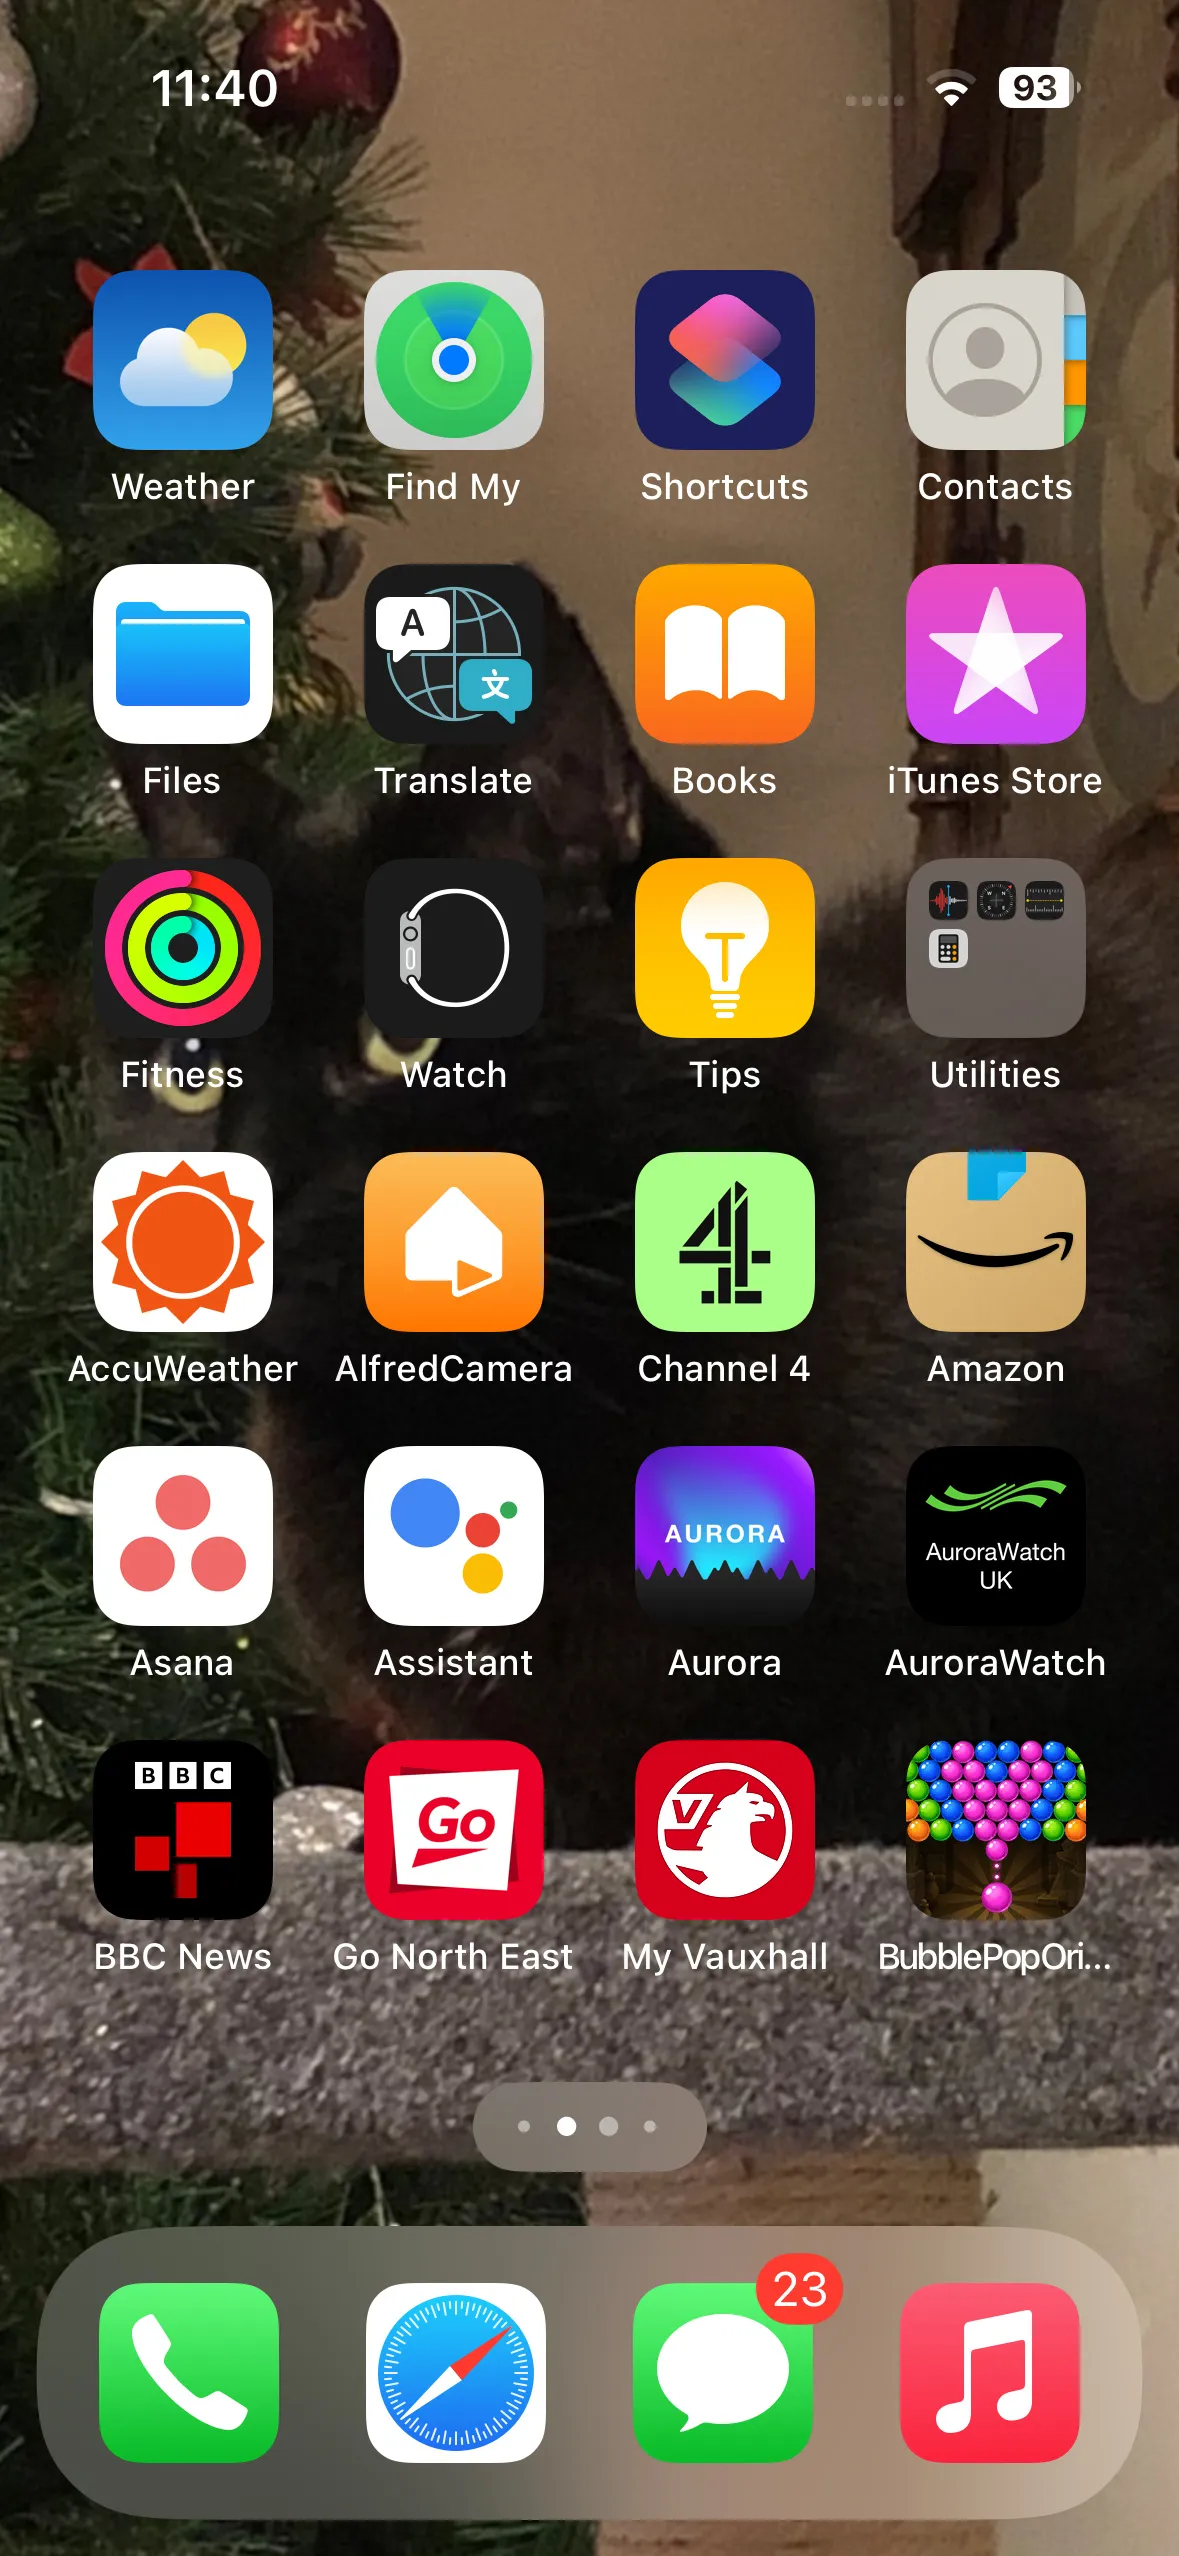 The iPhone home screen